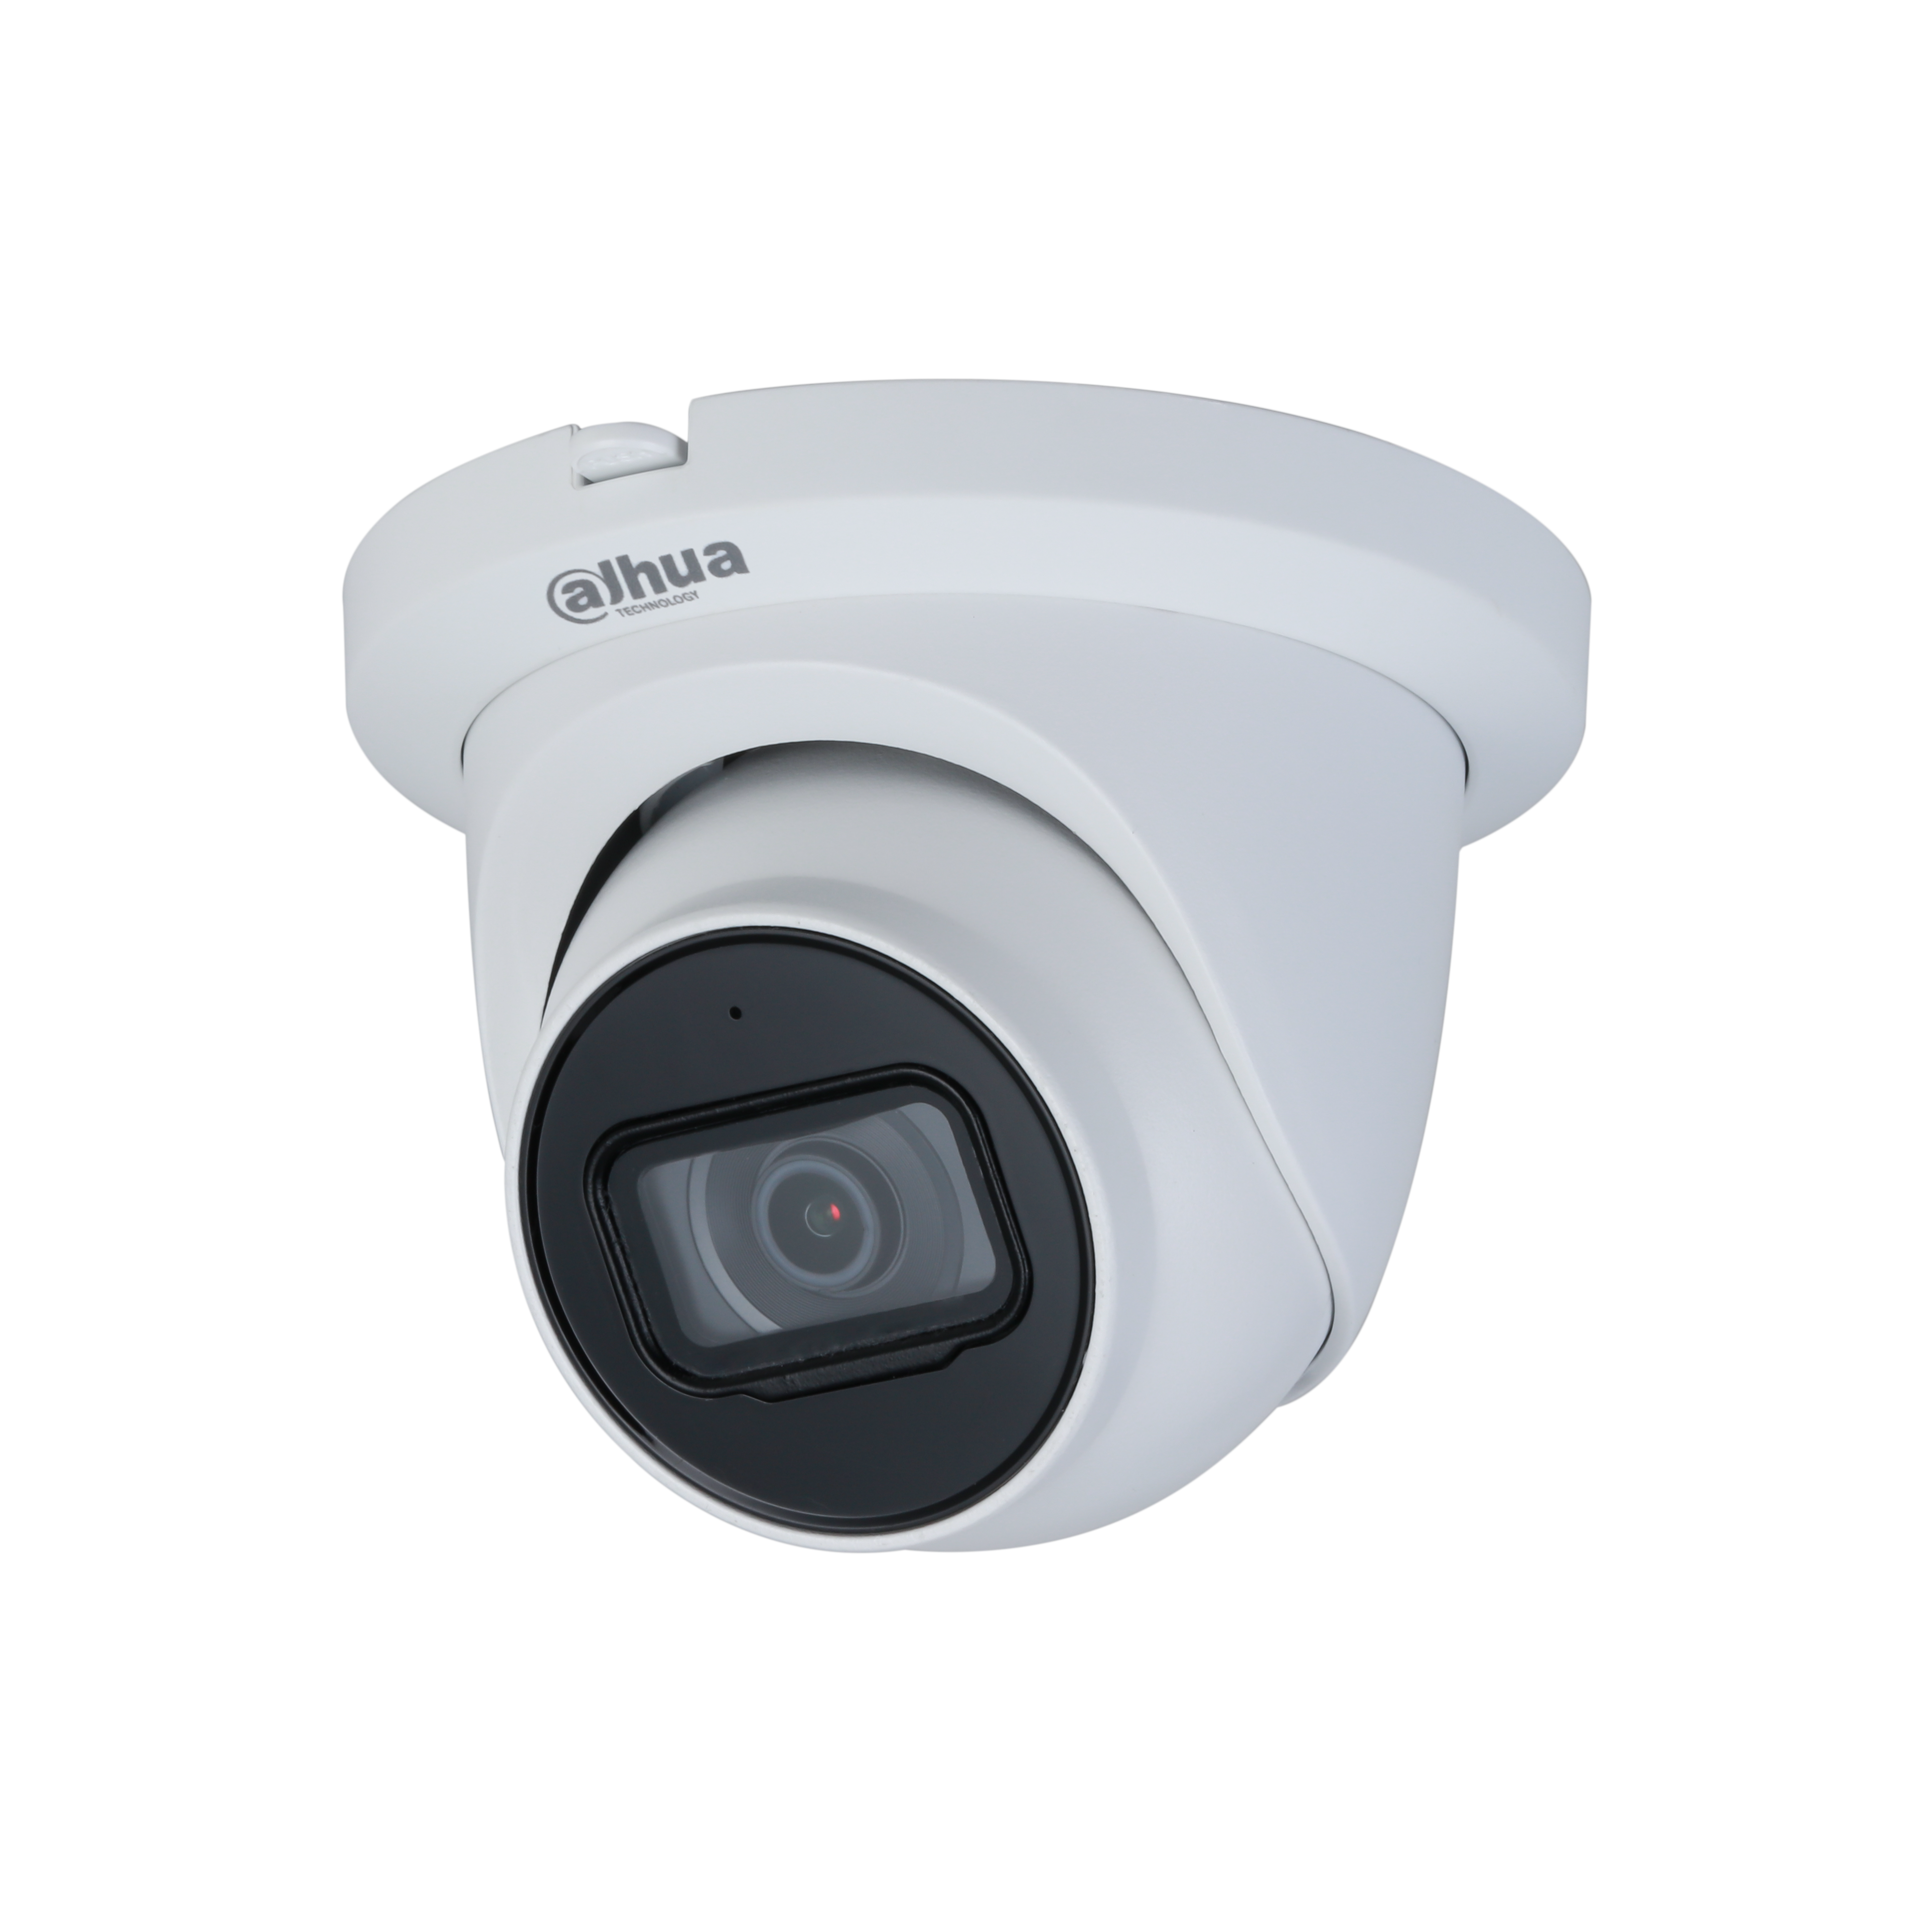 WIZMIND S SERIES IP CAMERA WHITE AI PEOPLE COUNT 5MP H.264/4+/5/5+ TURRET 140 TRUE WDR METAL 2.8MM FIXED LENS DEEP LIGHT IR 50M EPOE IP67 BUILT IN MIC AUDIO IN AUDIO OUT 1 x ALARM IN 1 x ALARM OUT SUPPORT UP TO 512GB SD 12VDC